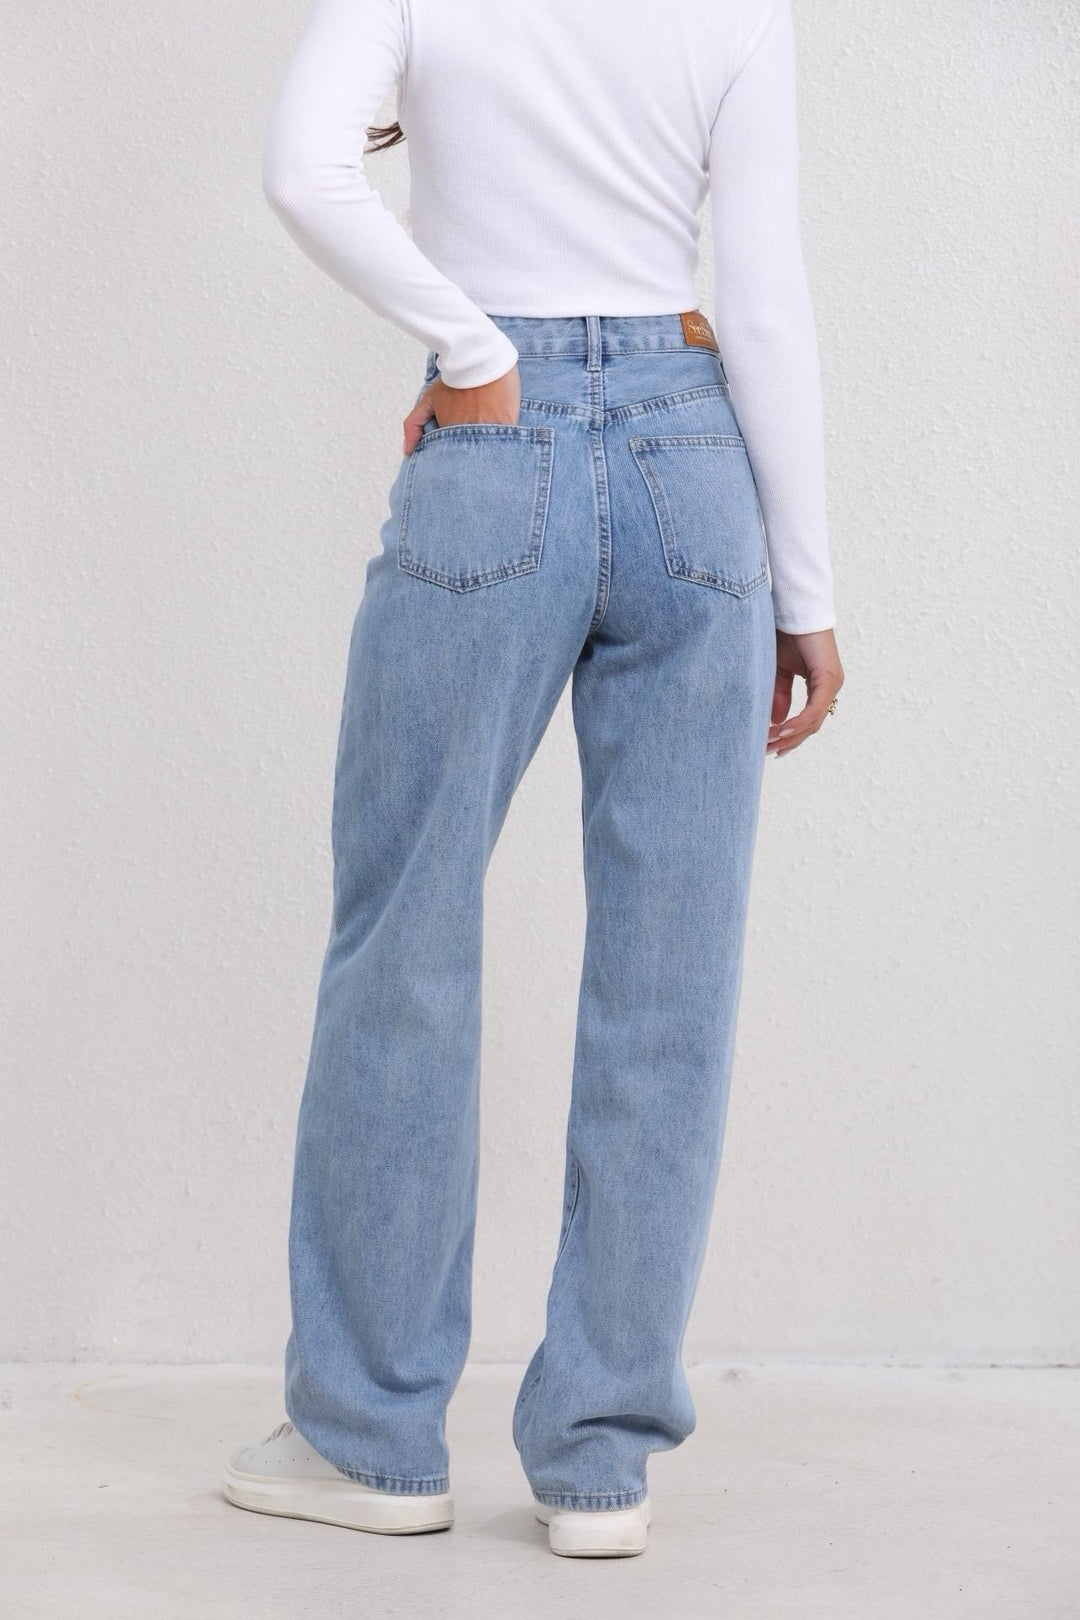 Romy Lined Straight Fit Jeans Jeans Routines Fashion   